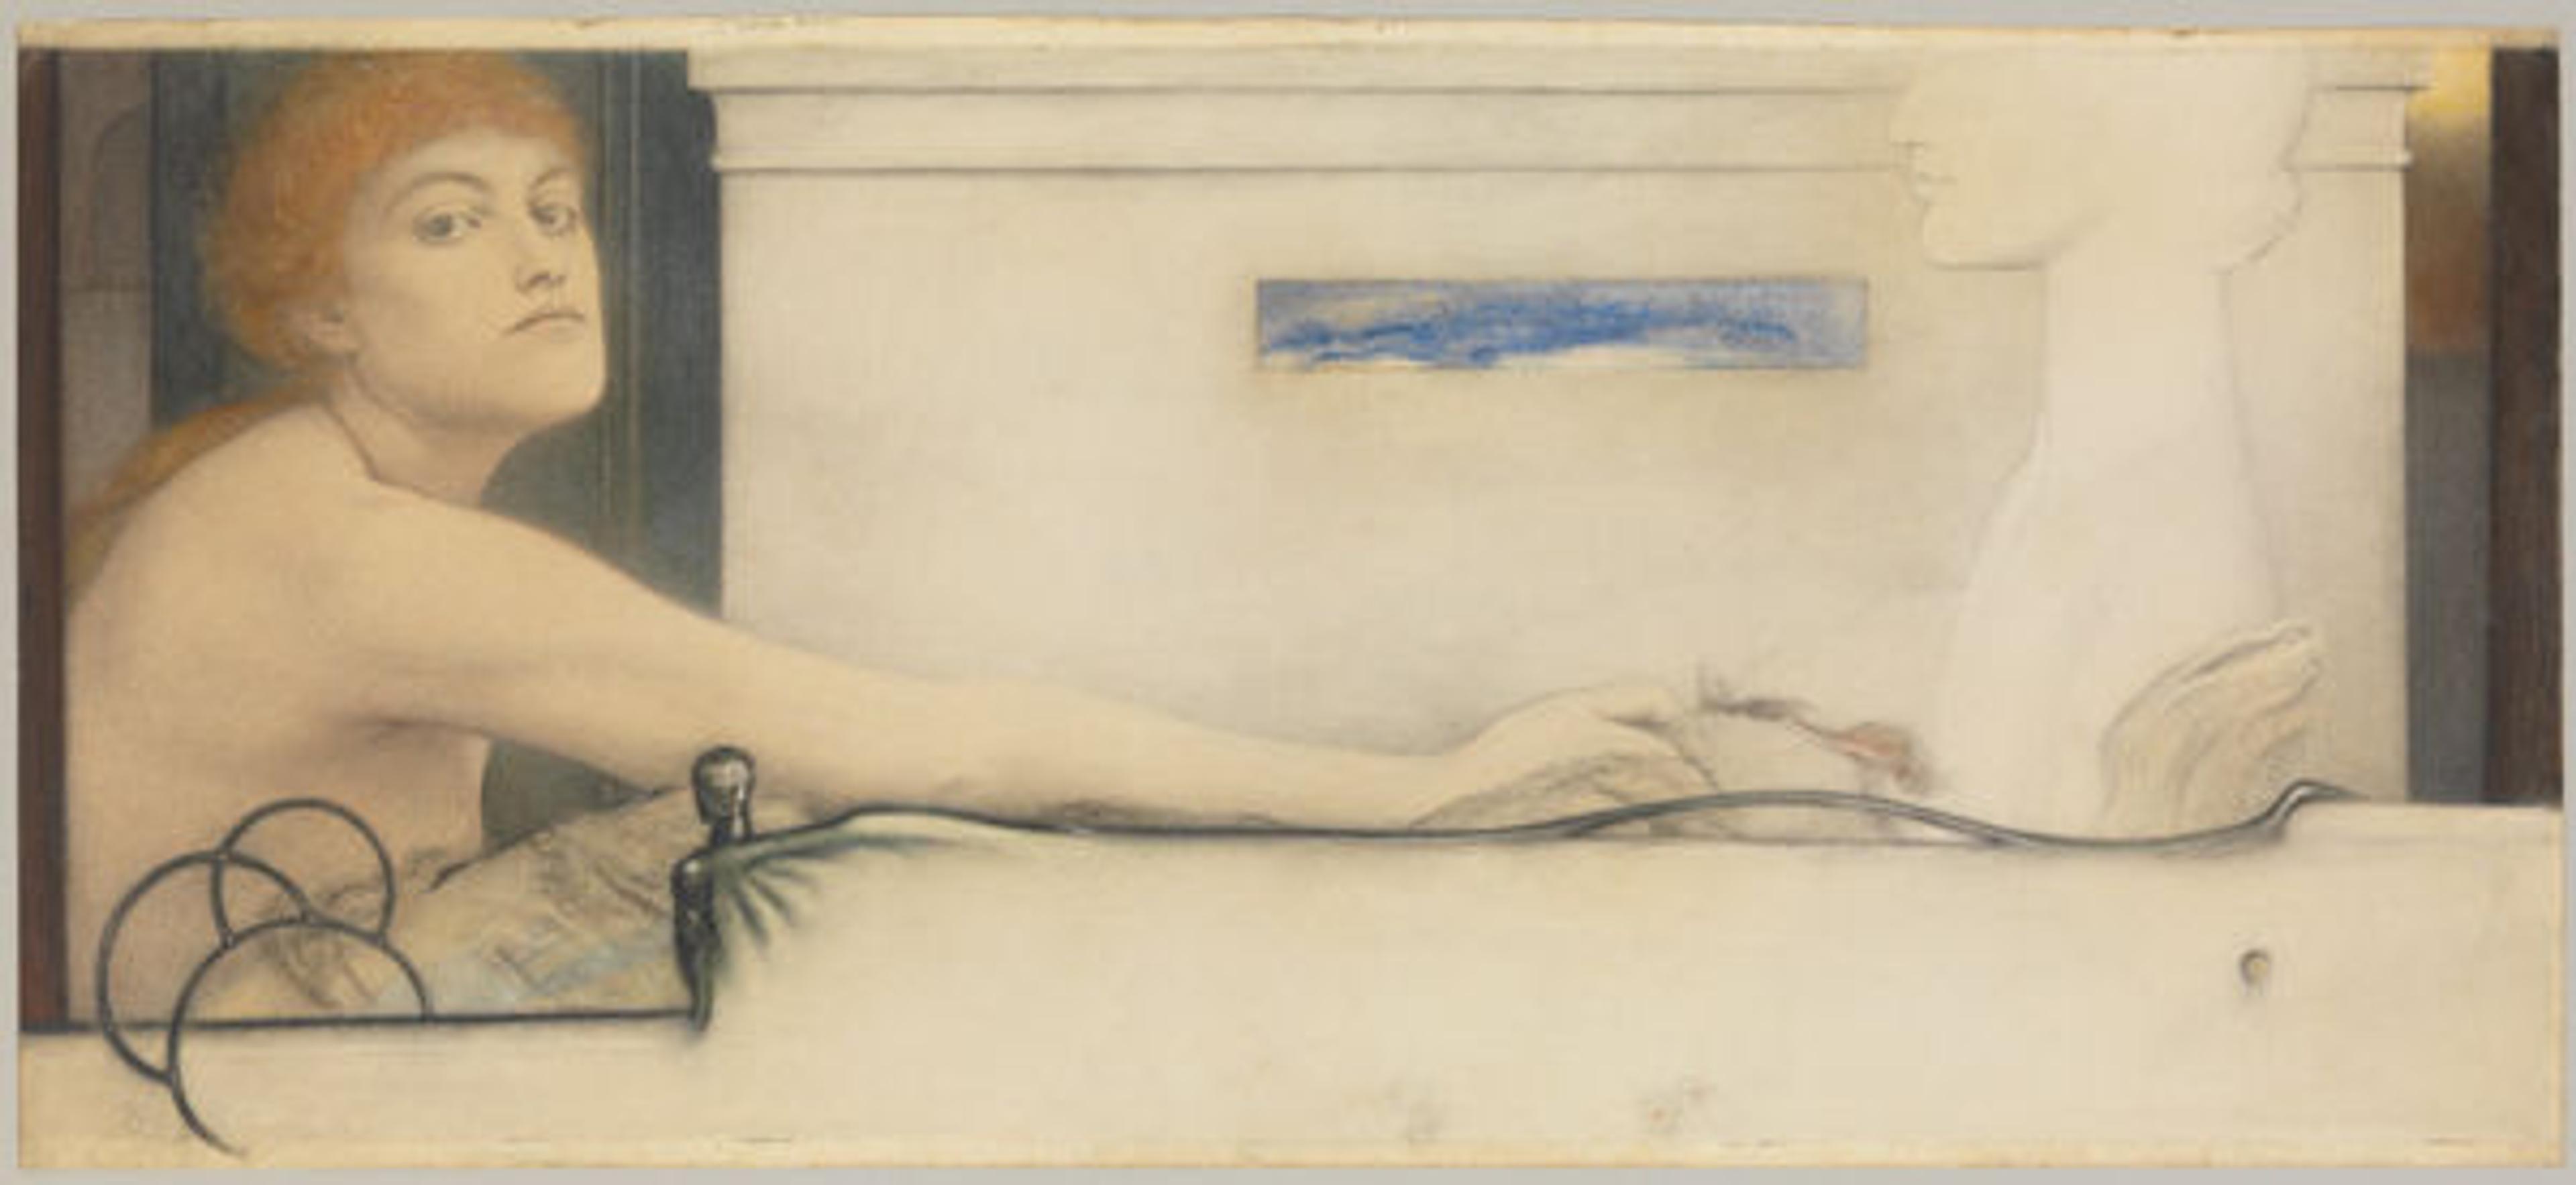 Fernand Khnopff (Belgian, 1858–1921). The Offering, 1891. Pastel, graphite, and chalk on paper; 13 3/4 x 29 1/2 in. (34.9 x 74.9 cm). The Metropolitan Museum of Art, New York, Bequest of William S. Lieberman, 2005 (2007.49.651)